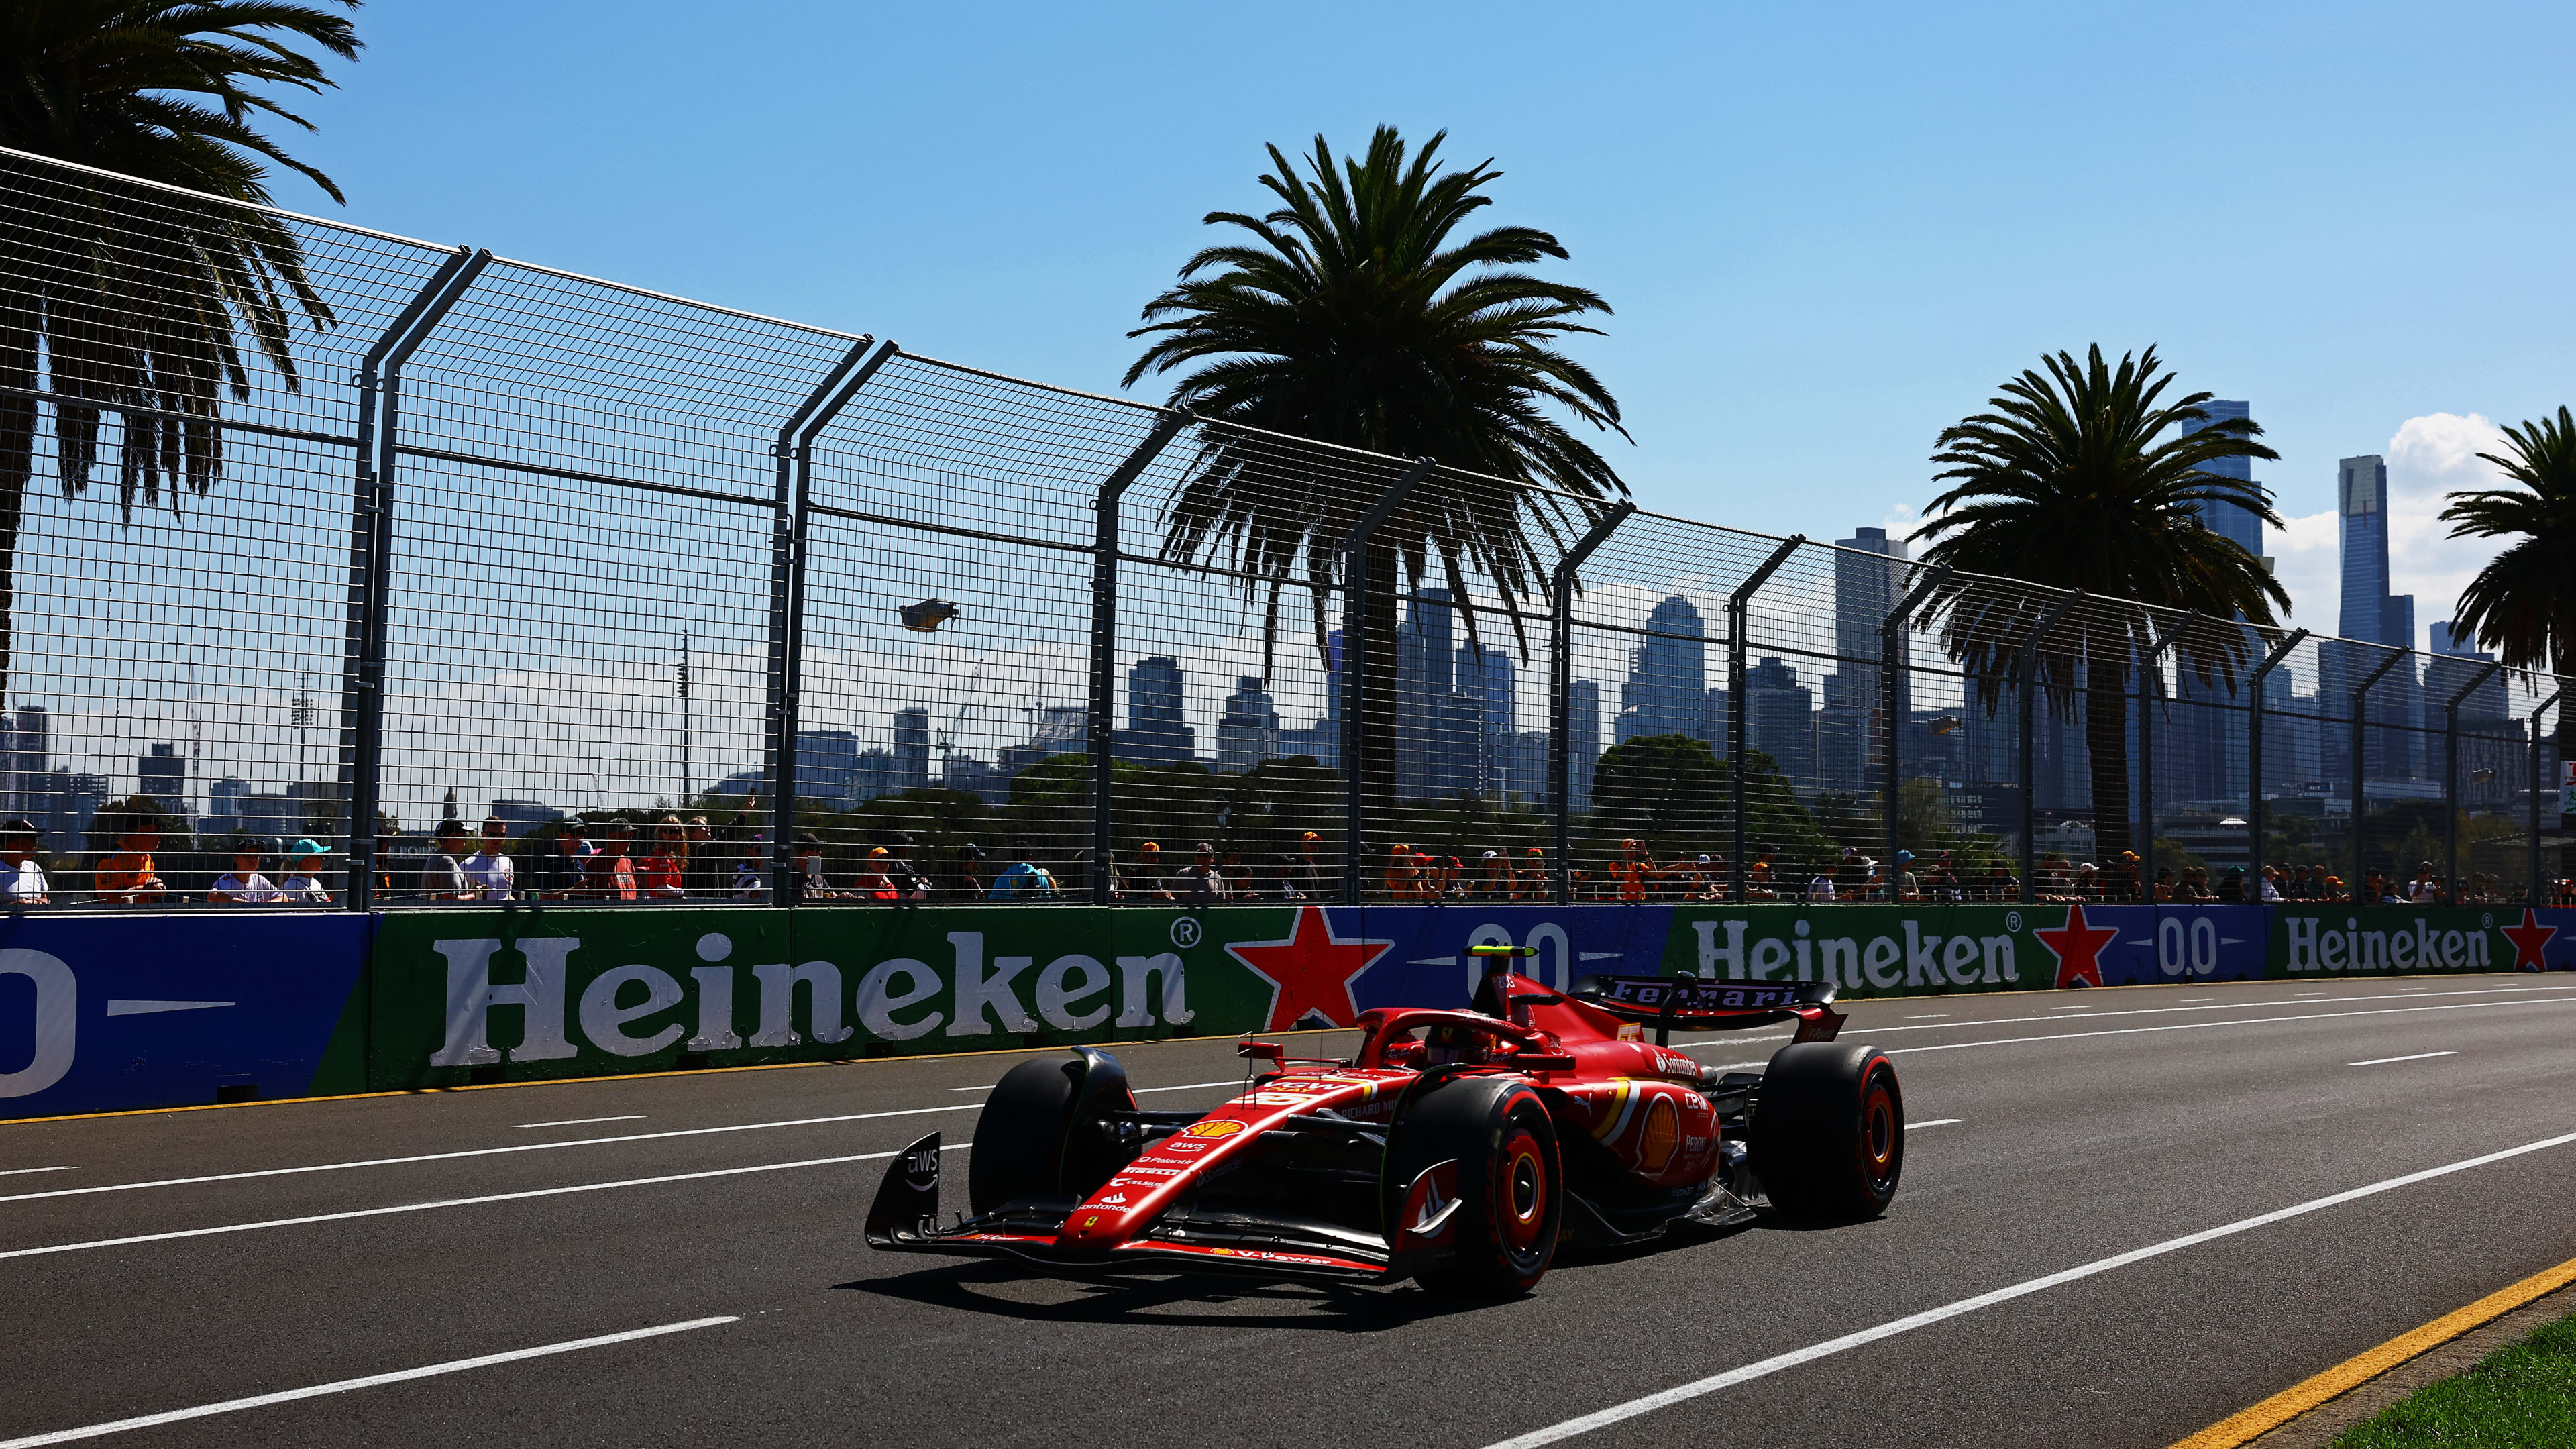 LIVE COVERAGE - First Practice in Australia